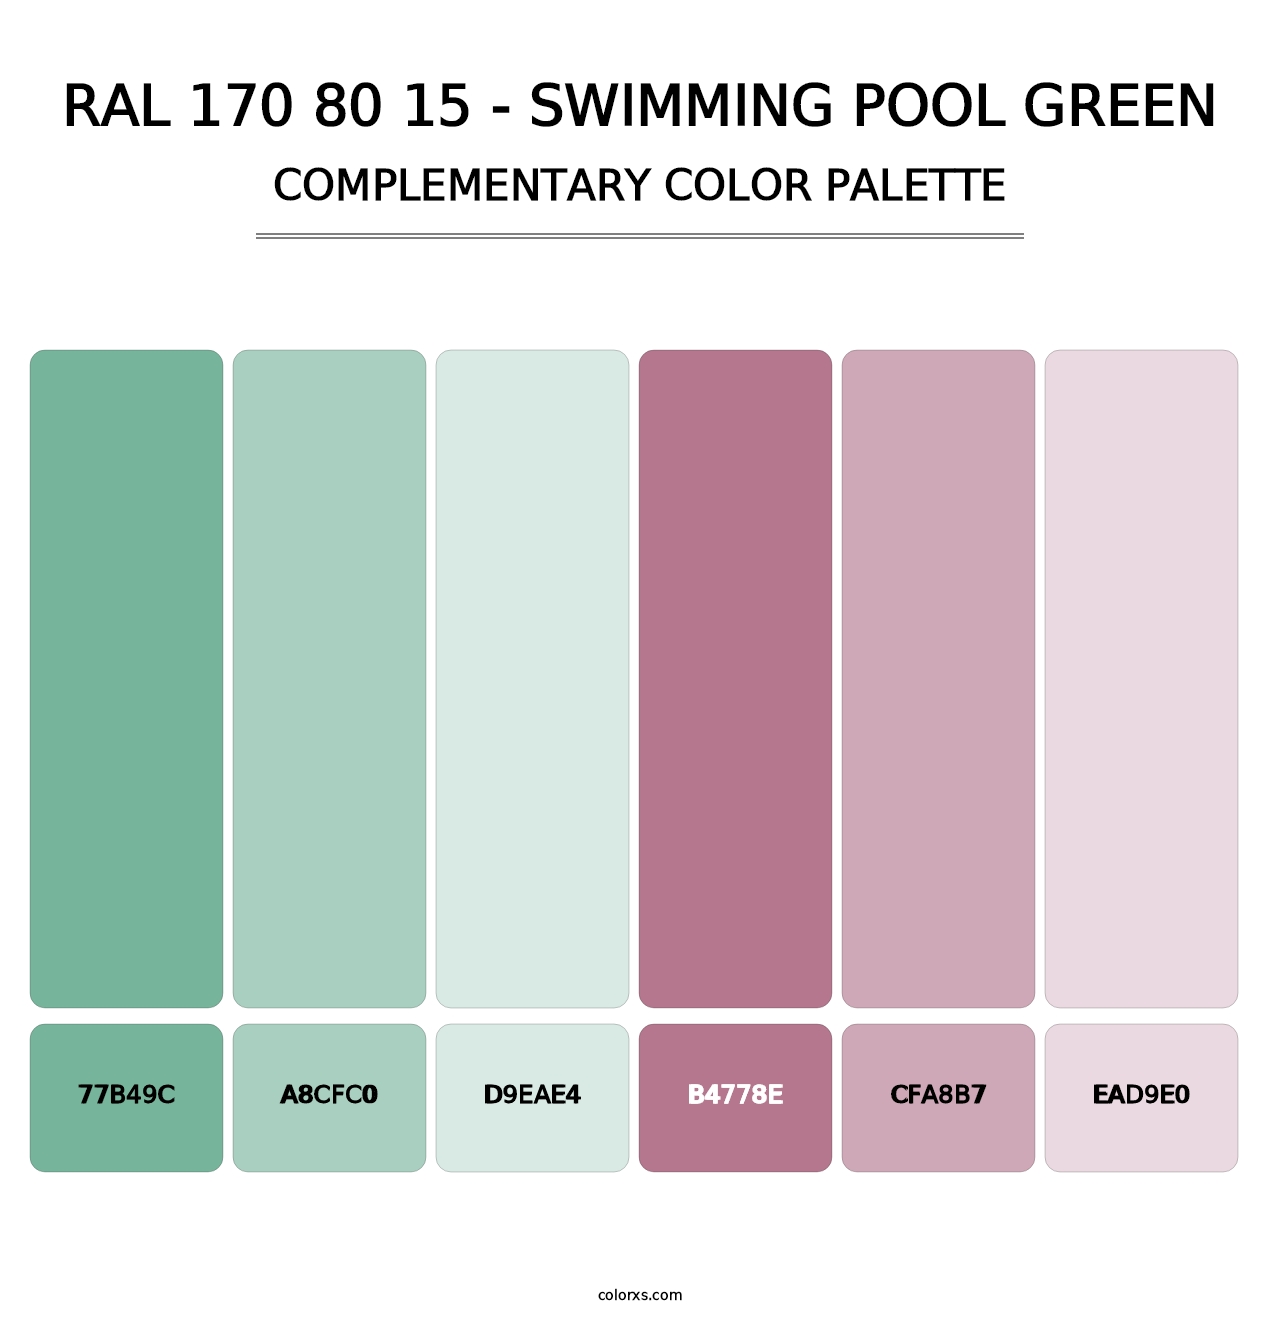 RAL 170 80 15 - Swimming Pool Green - Complementary Color Palette